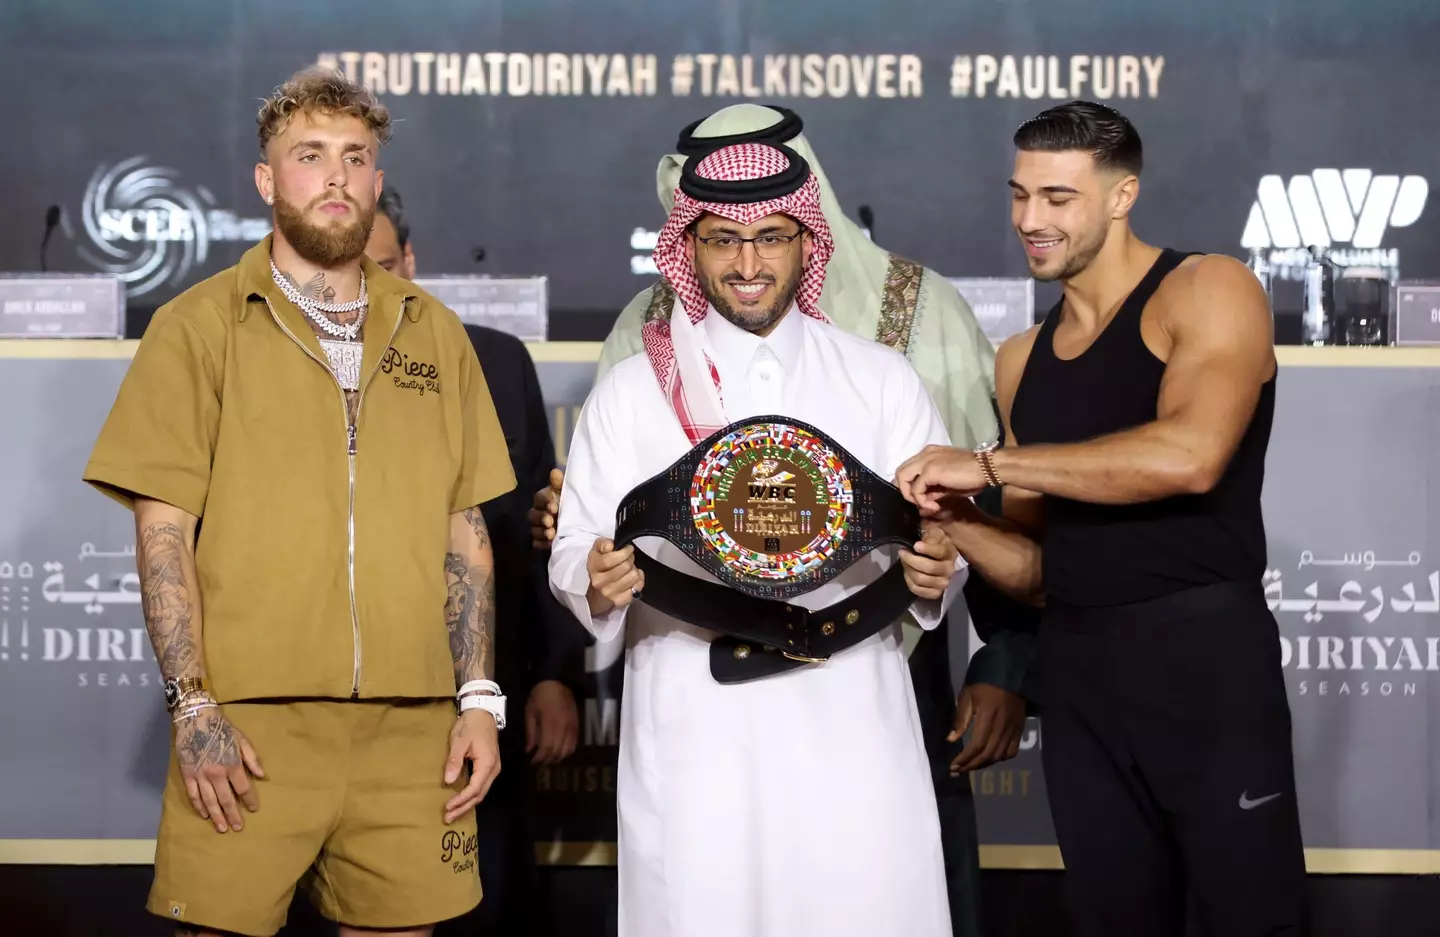 Jake Paul offered Tommy Fury's team 'all or nothing' on the fight outcome.